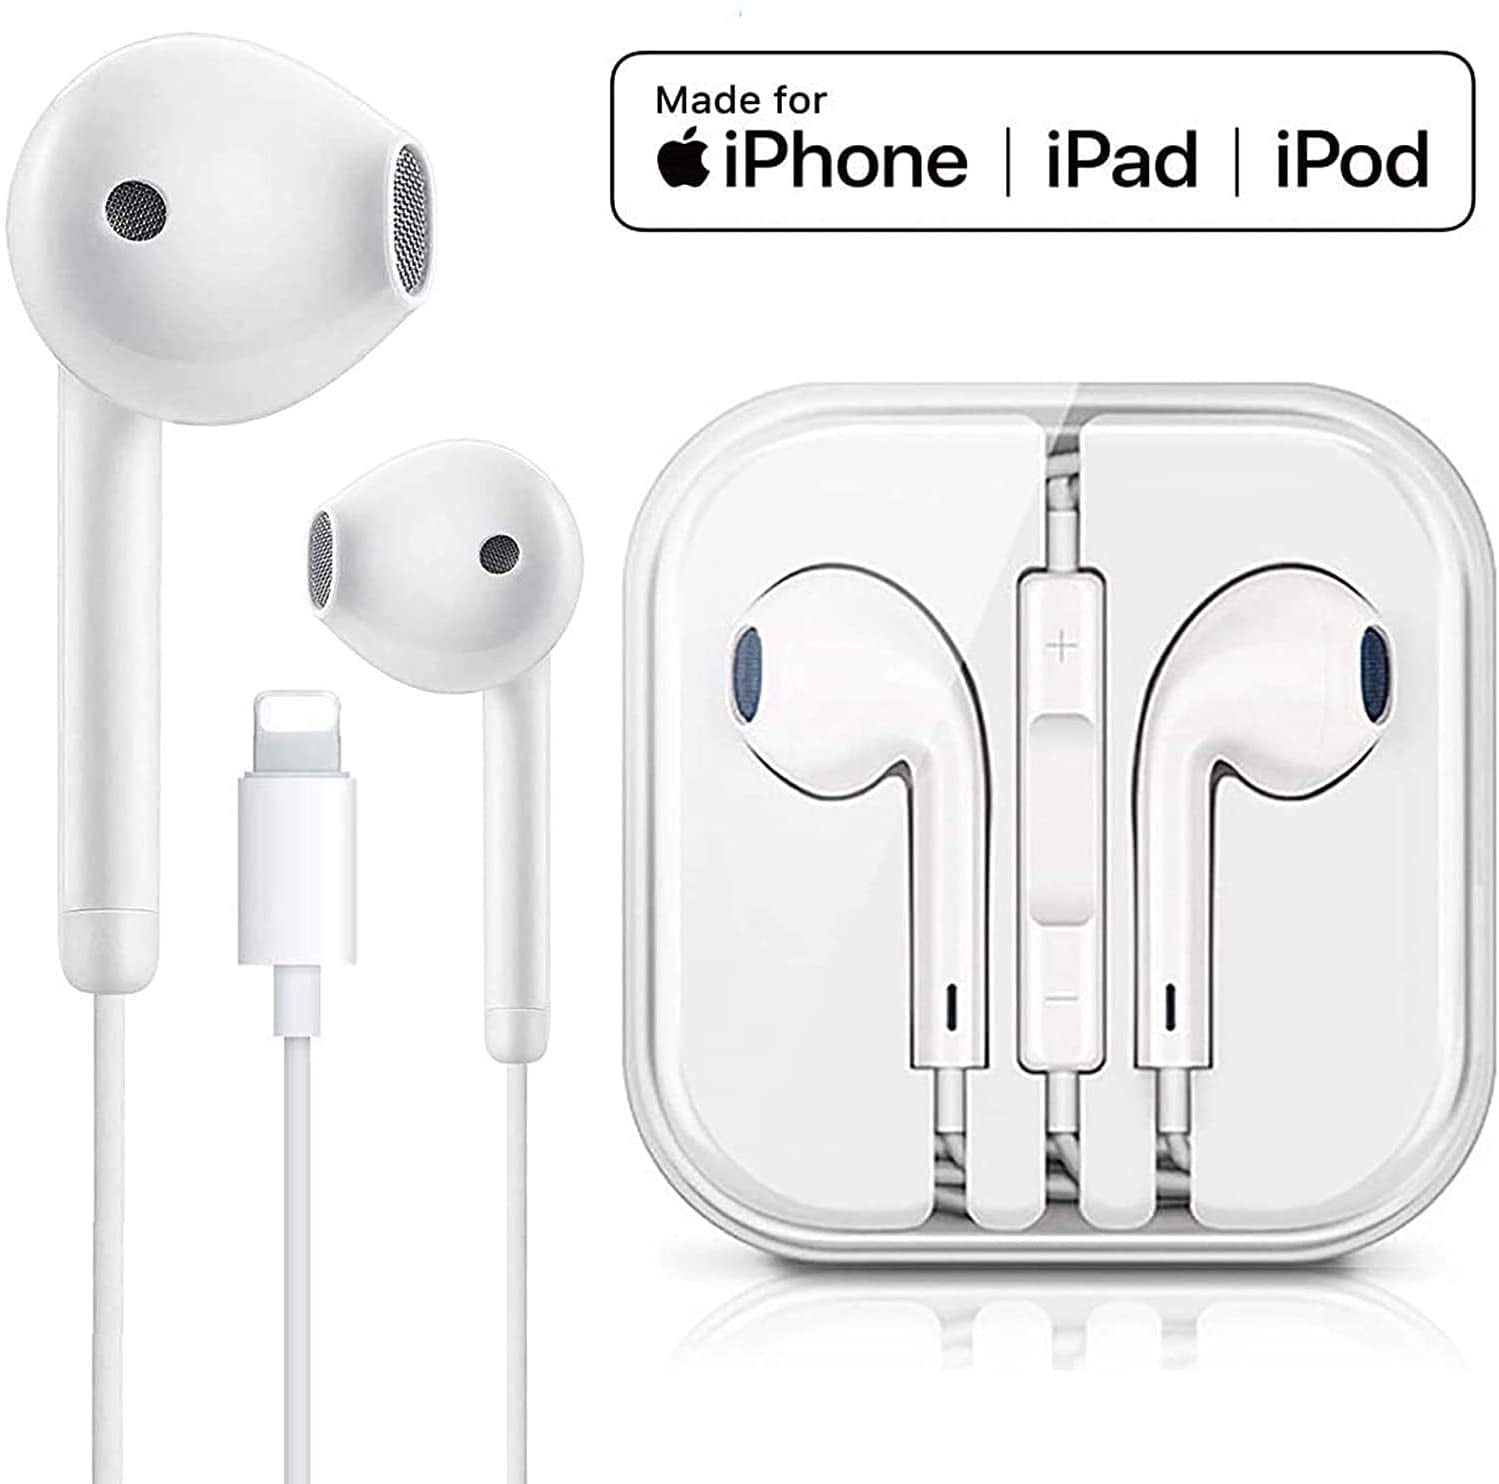 Humupii 2 Pack Headphones/Earphones/Earbuds 3.5mm Wired Headphones Noise Isolating Earphones with Built-in Microphone & Volume Control Compatible with iPhone 6 SE 5S 4 iPod iPad Samsung/Android MP3